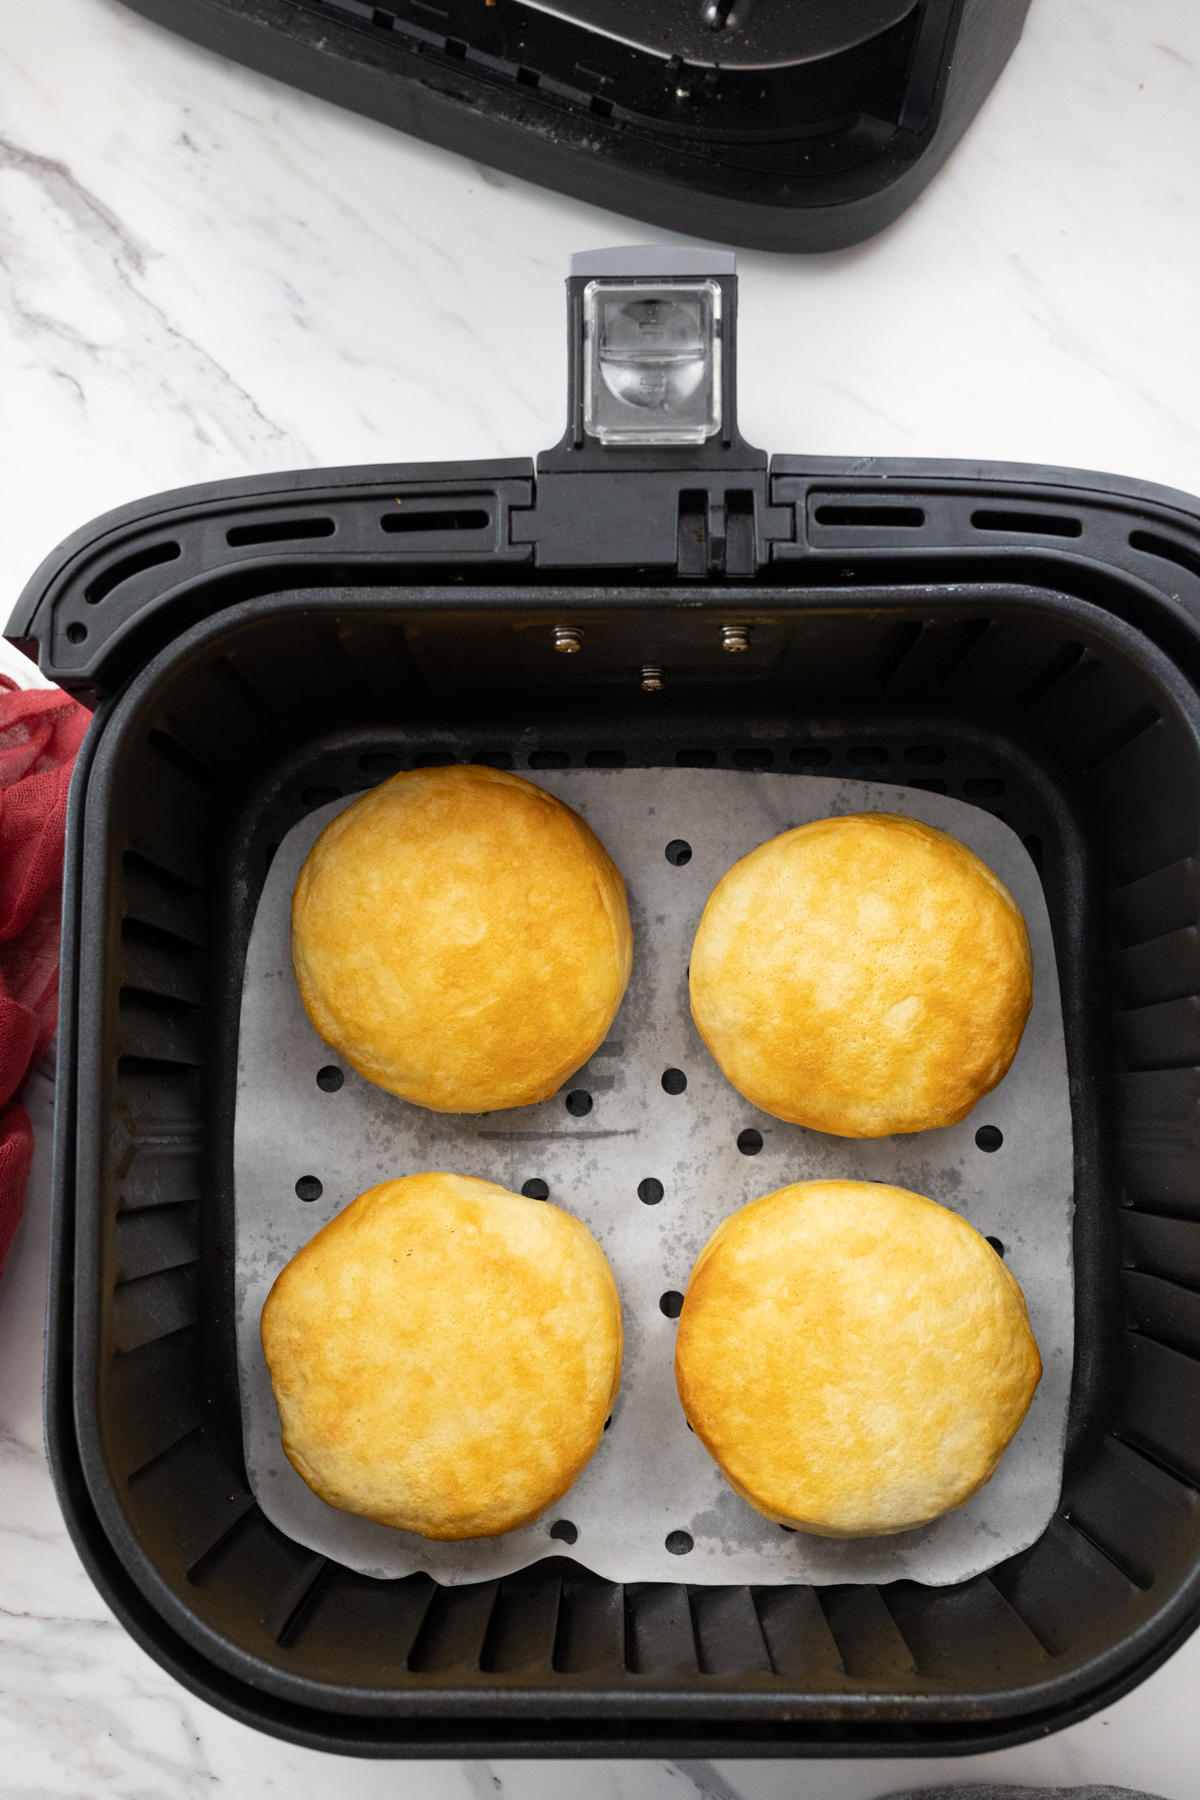 Top view of an open air fryer with four fried Pillsbury Grand Biscuits in it.